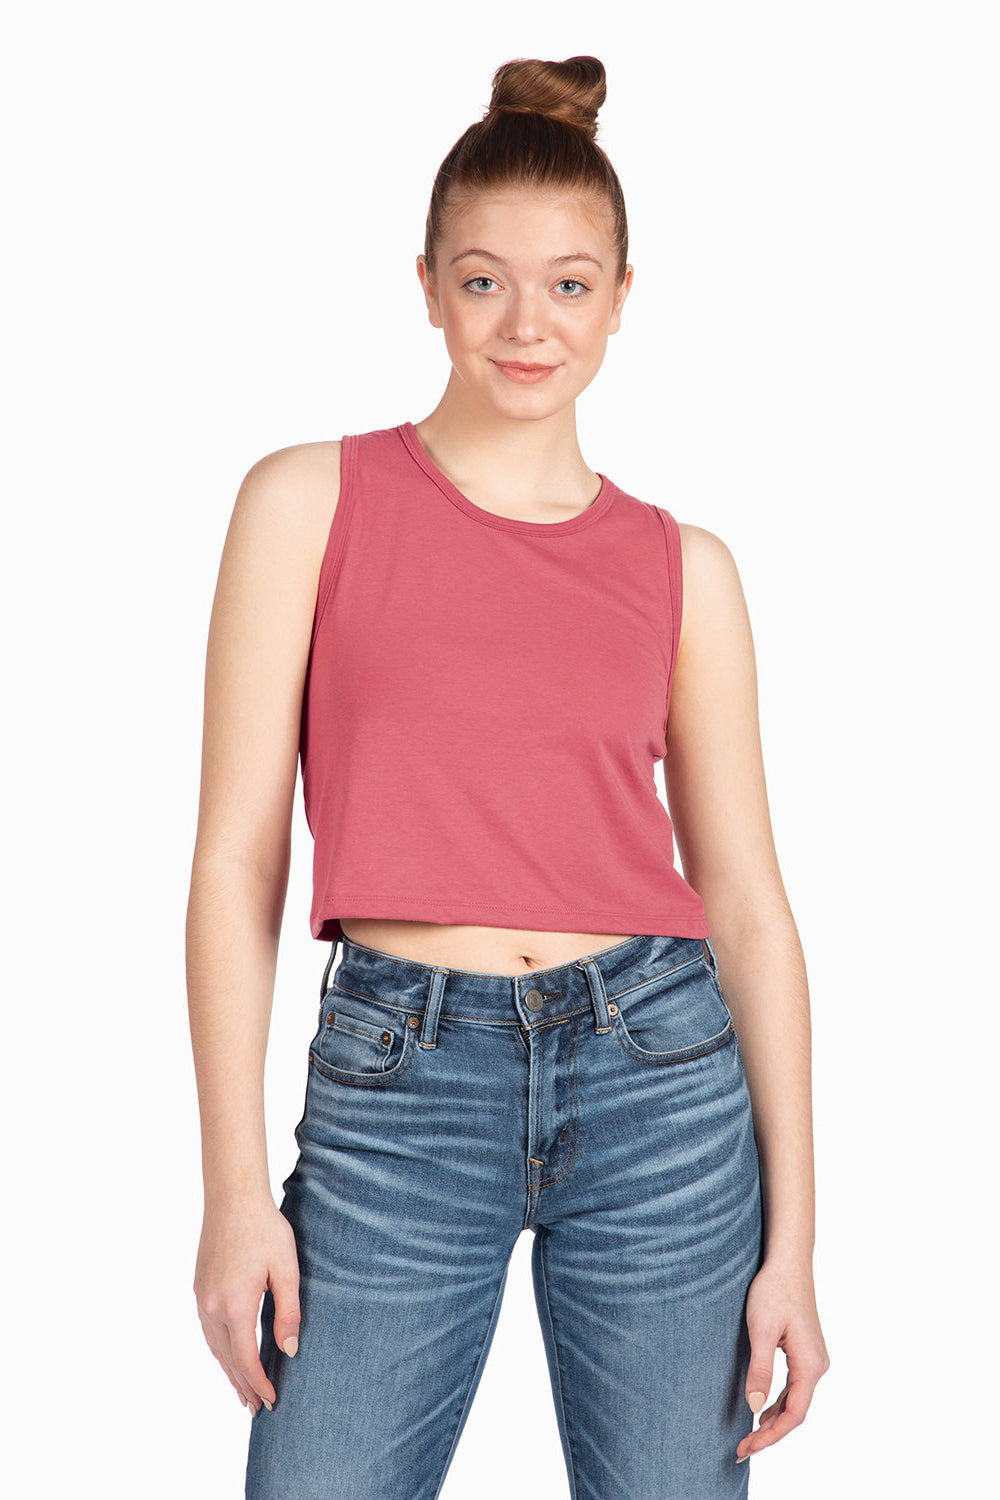 Next Level 5083 Womens Festival Cropped Tank Top Smoked Paprika Front